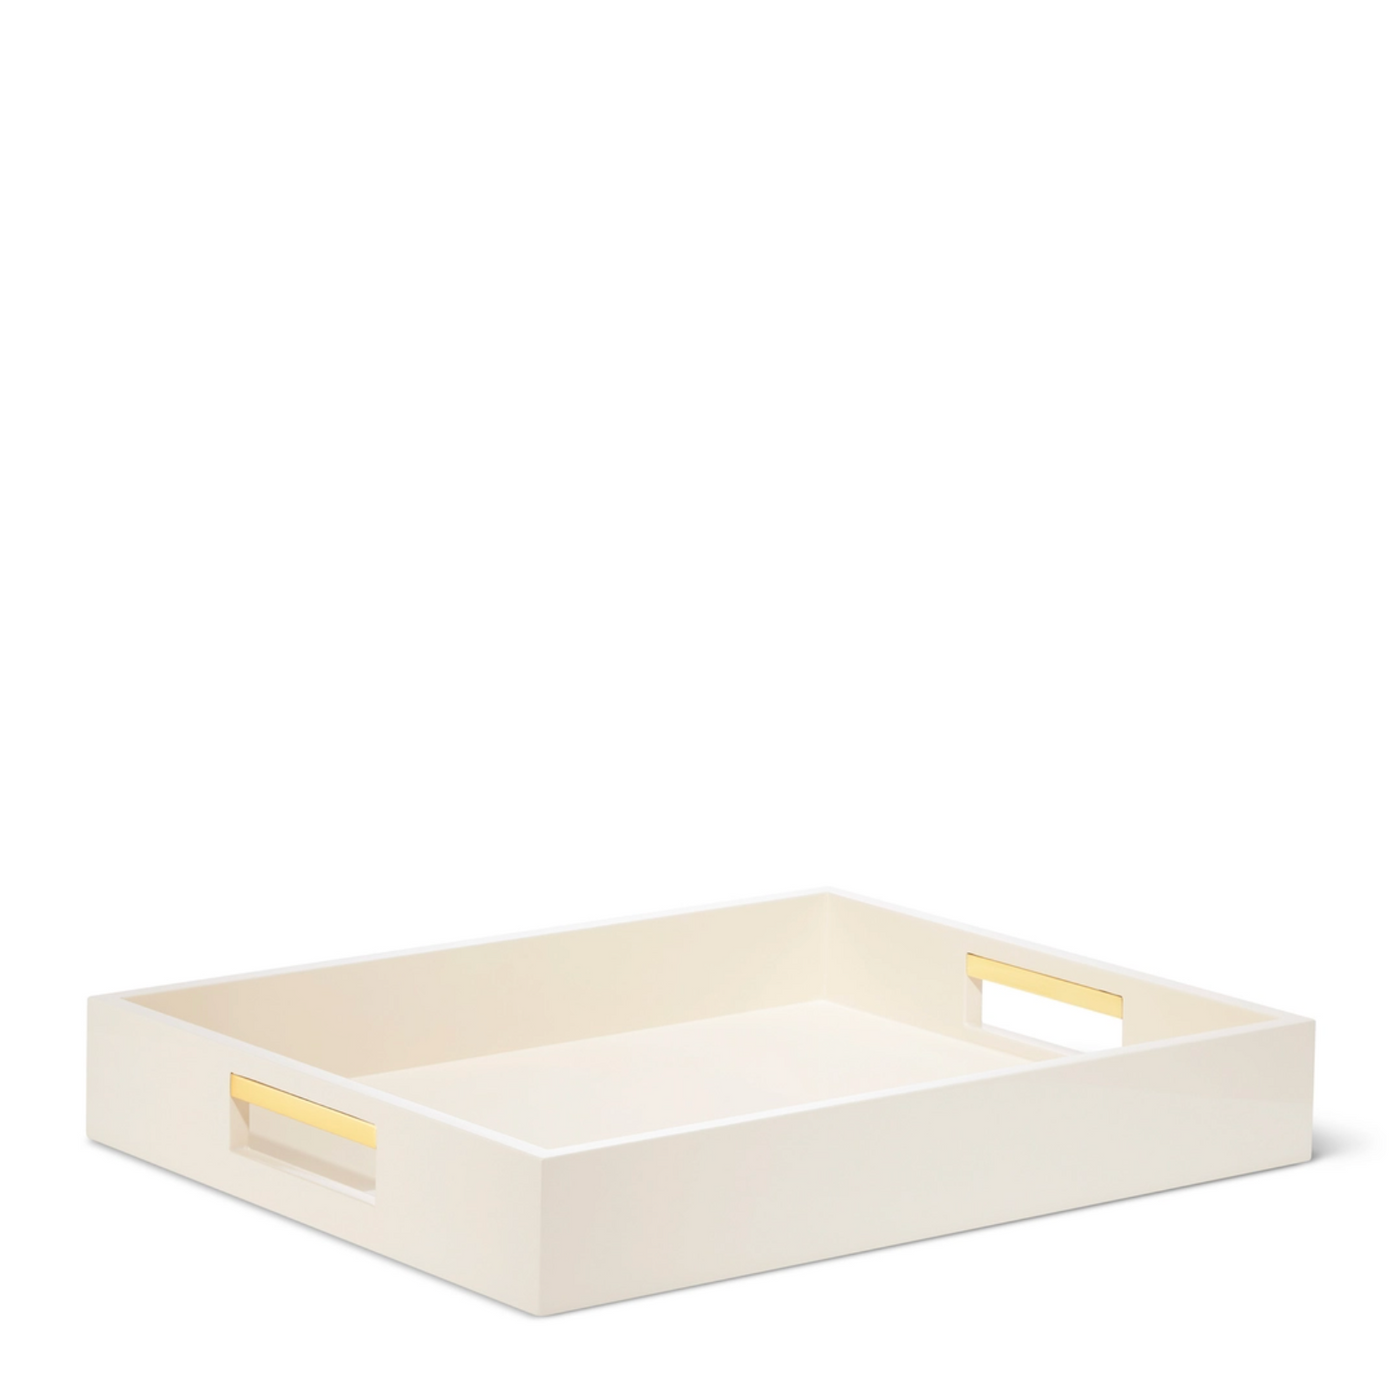 AERIN PIERO LACQUER TRAY (AVAILABLE IN 2 COLORS)